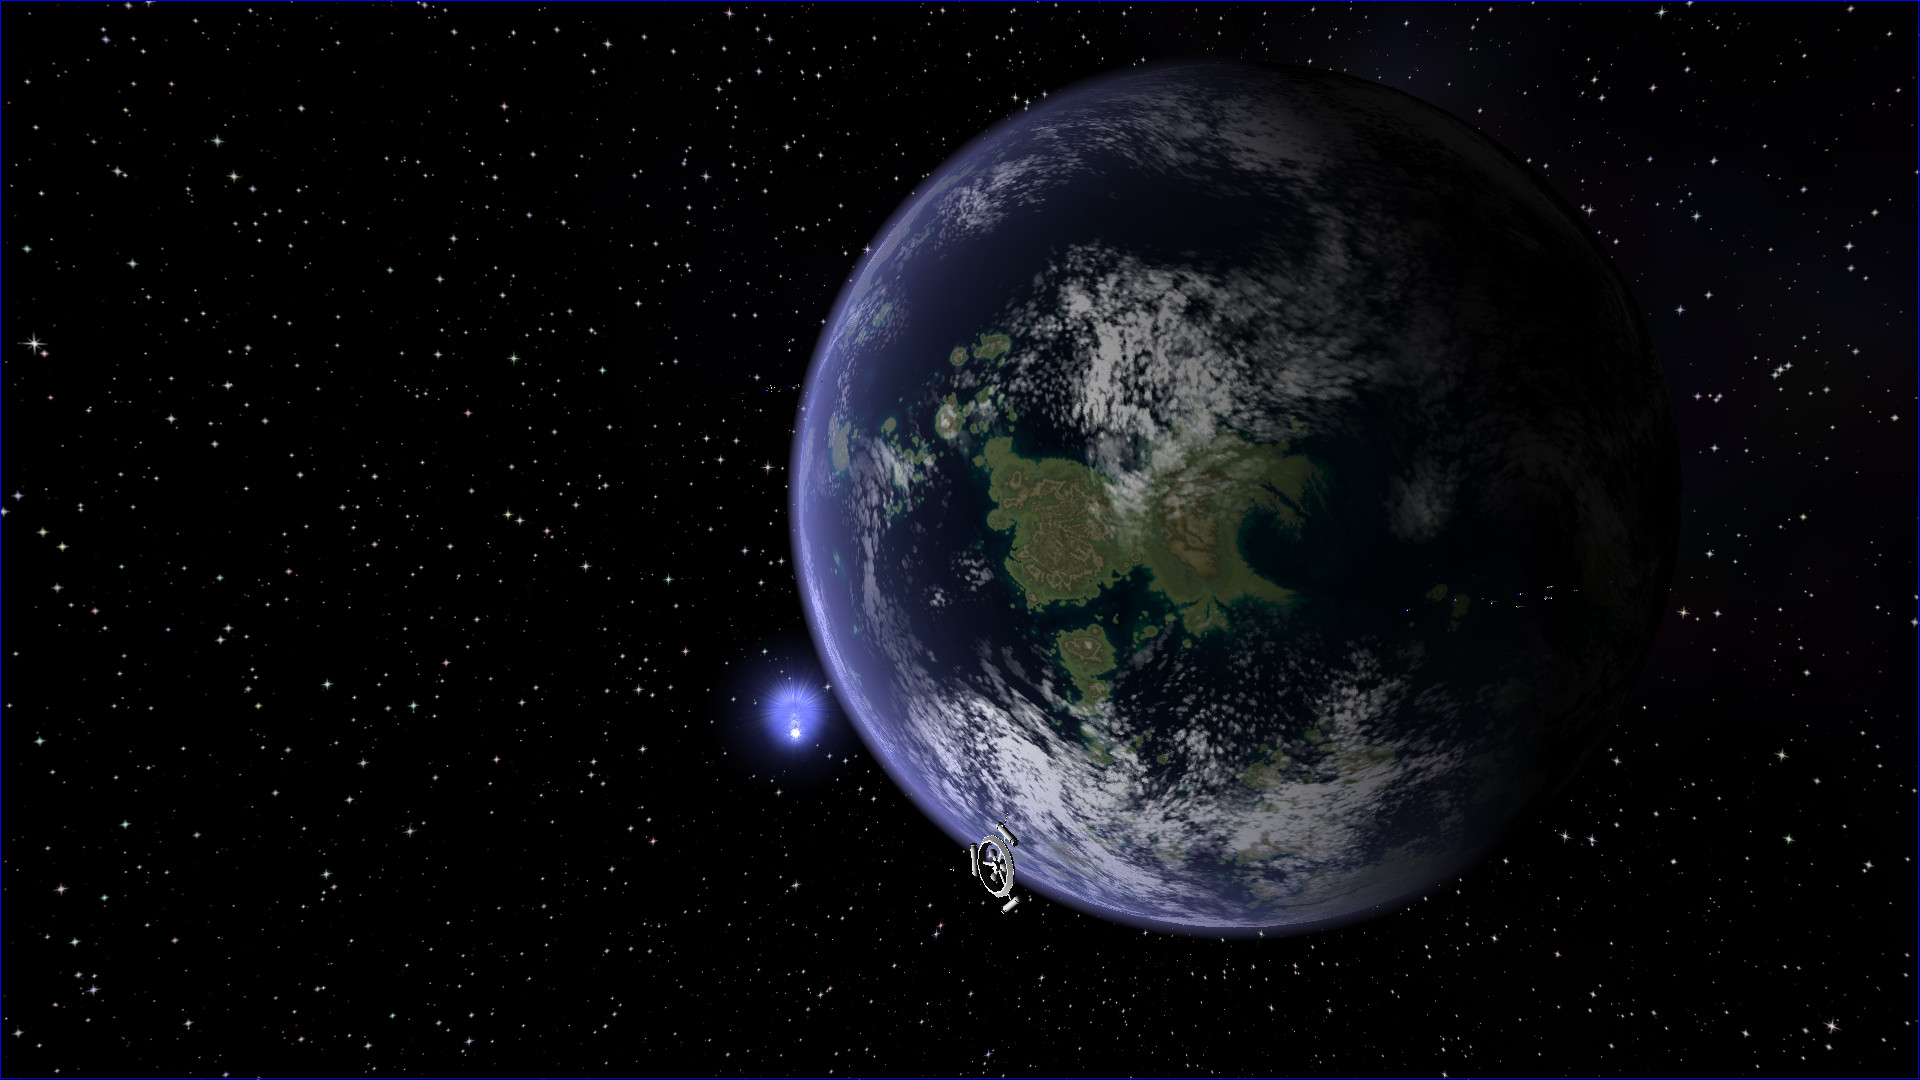 Image of a terrestrial planet